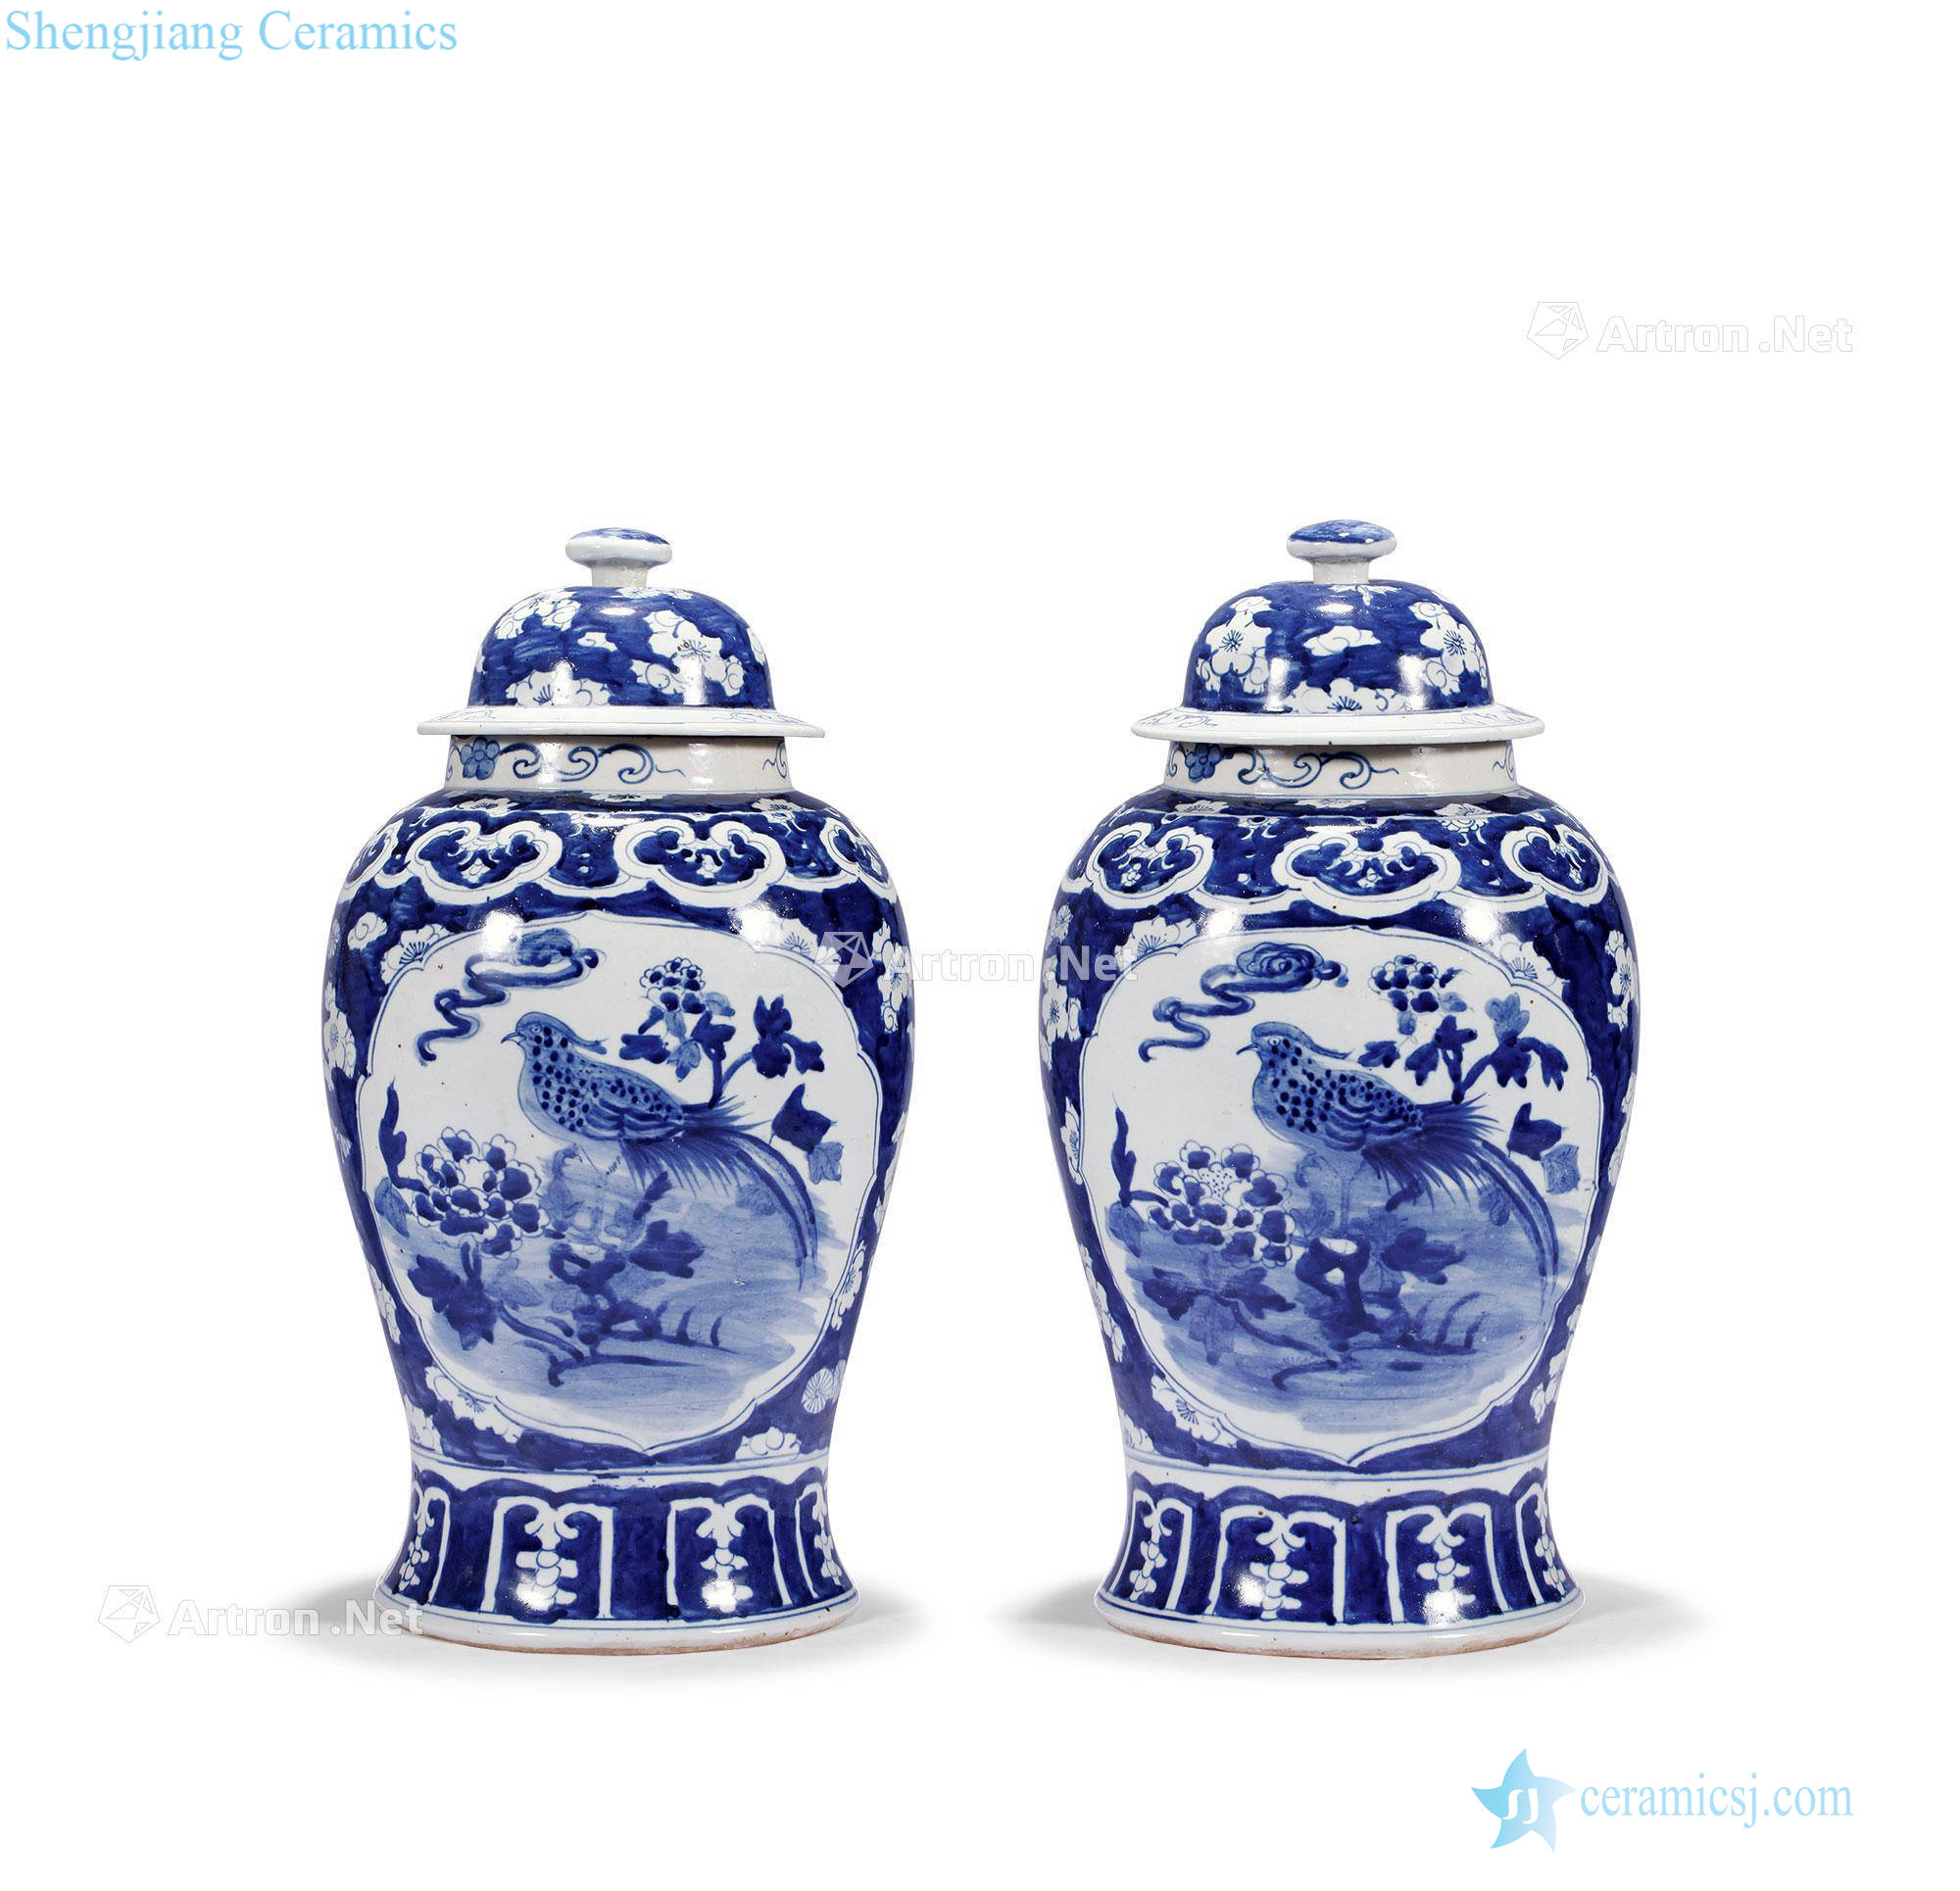 Qing qianlong medallion flower-and-bird grain general canister (a)